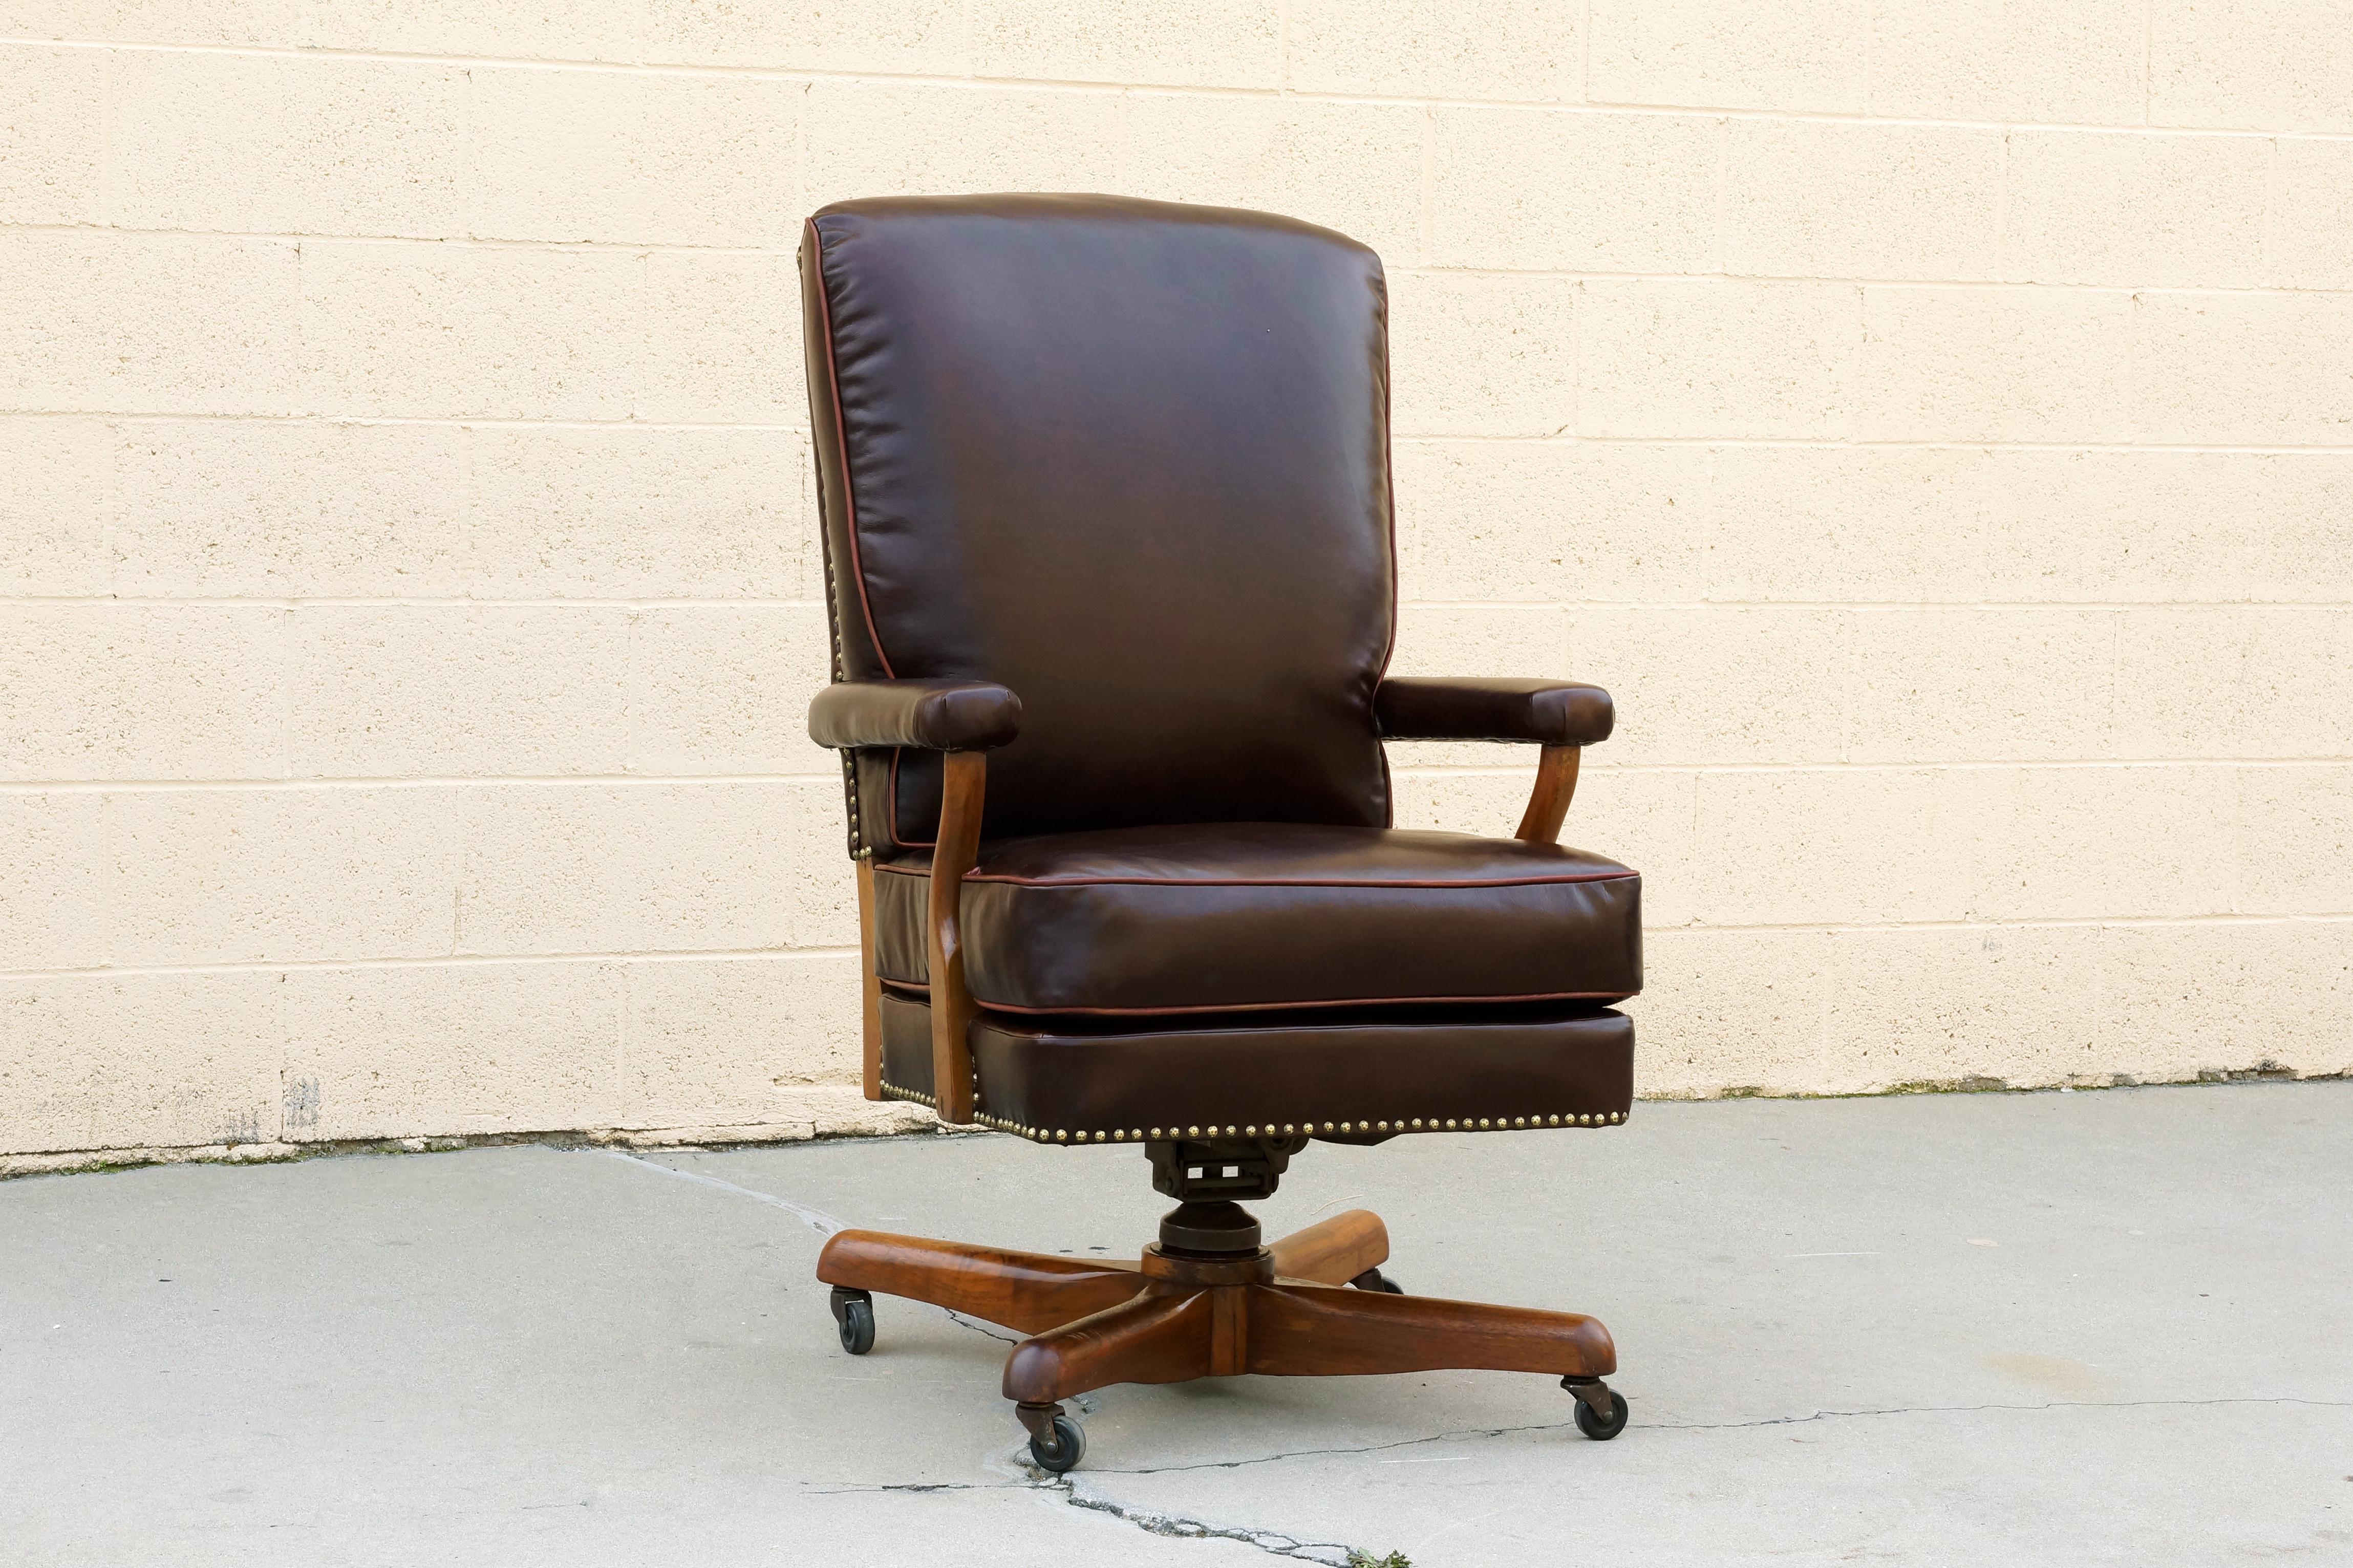 Very special leather and walnut oversized armchair, circa 1930s. Newly upholstered in rich brown leather with light brown vinyl piping and hammered upholstery tacks. Thick walnut frame has been lightly reconditioned. Plush and extra comfy.